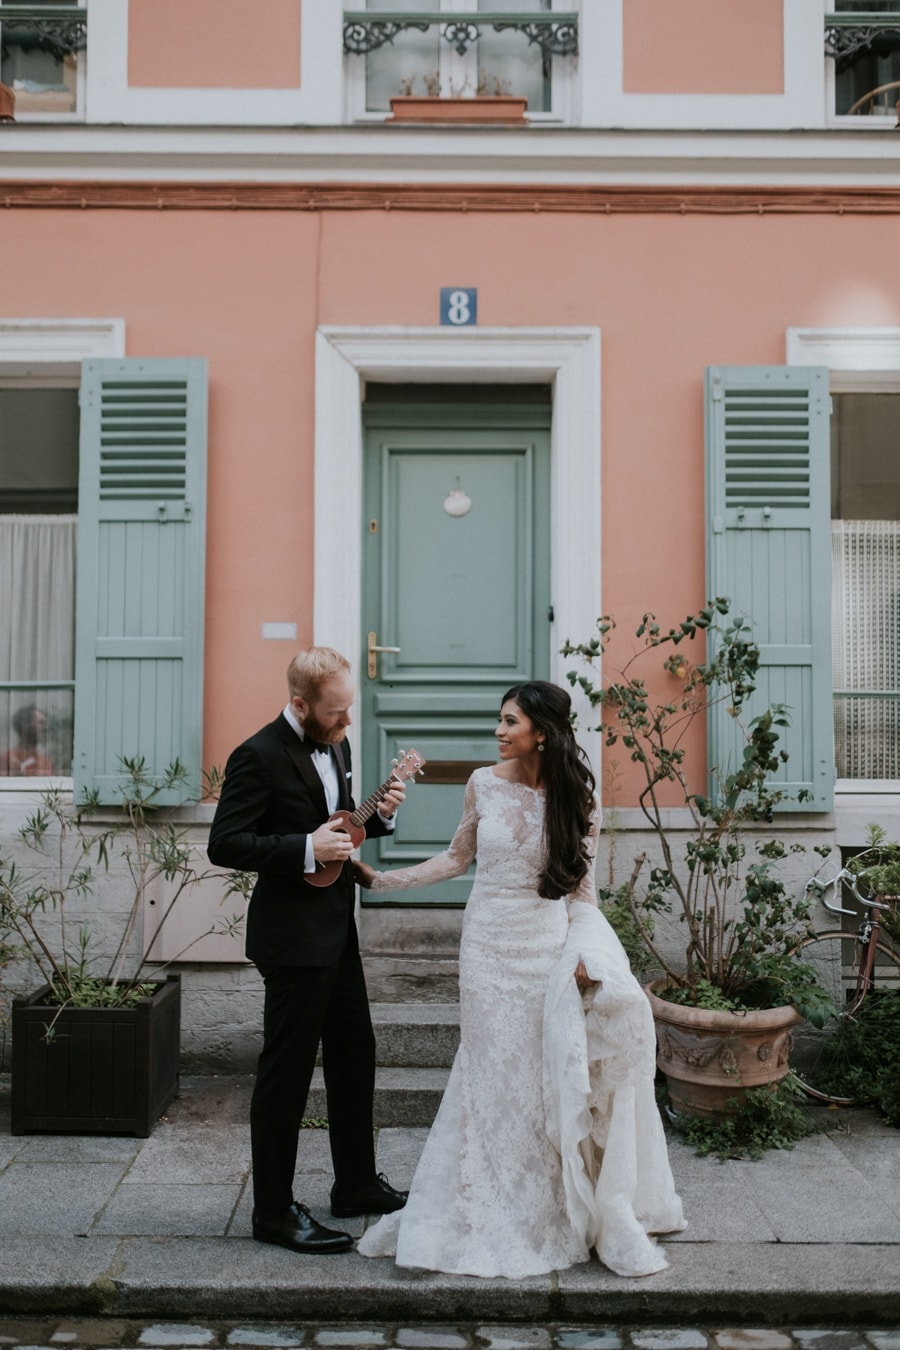 The Top 13 to Consider When Planning a Destination Wedding - What I Learned! (Best Wedding Photos in France)